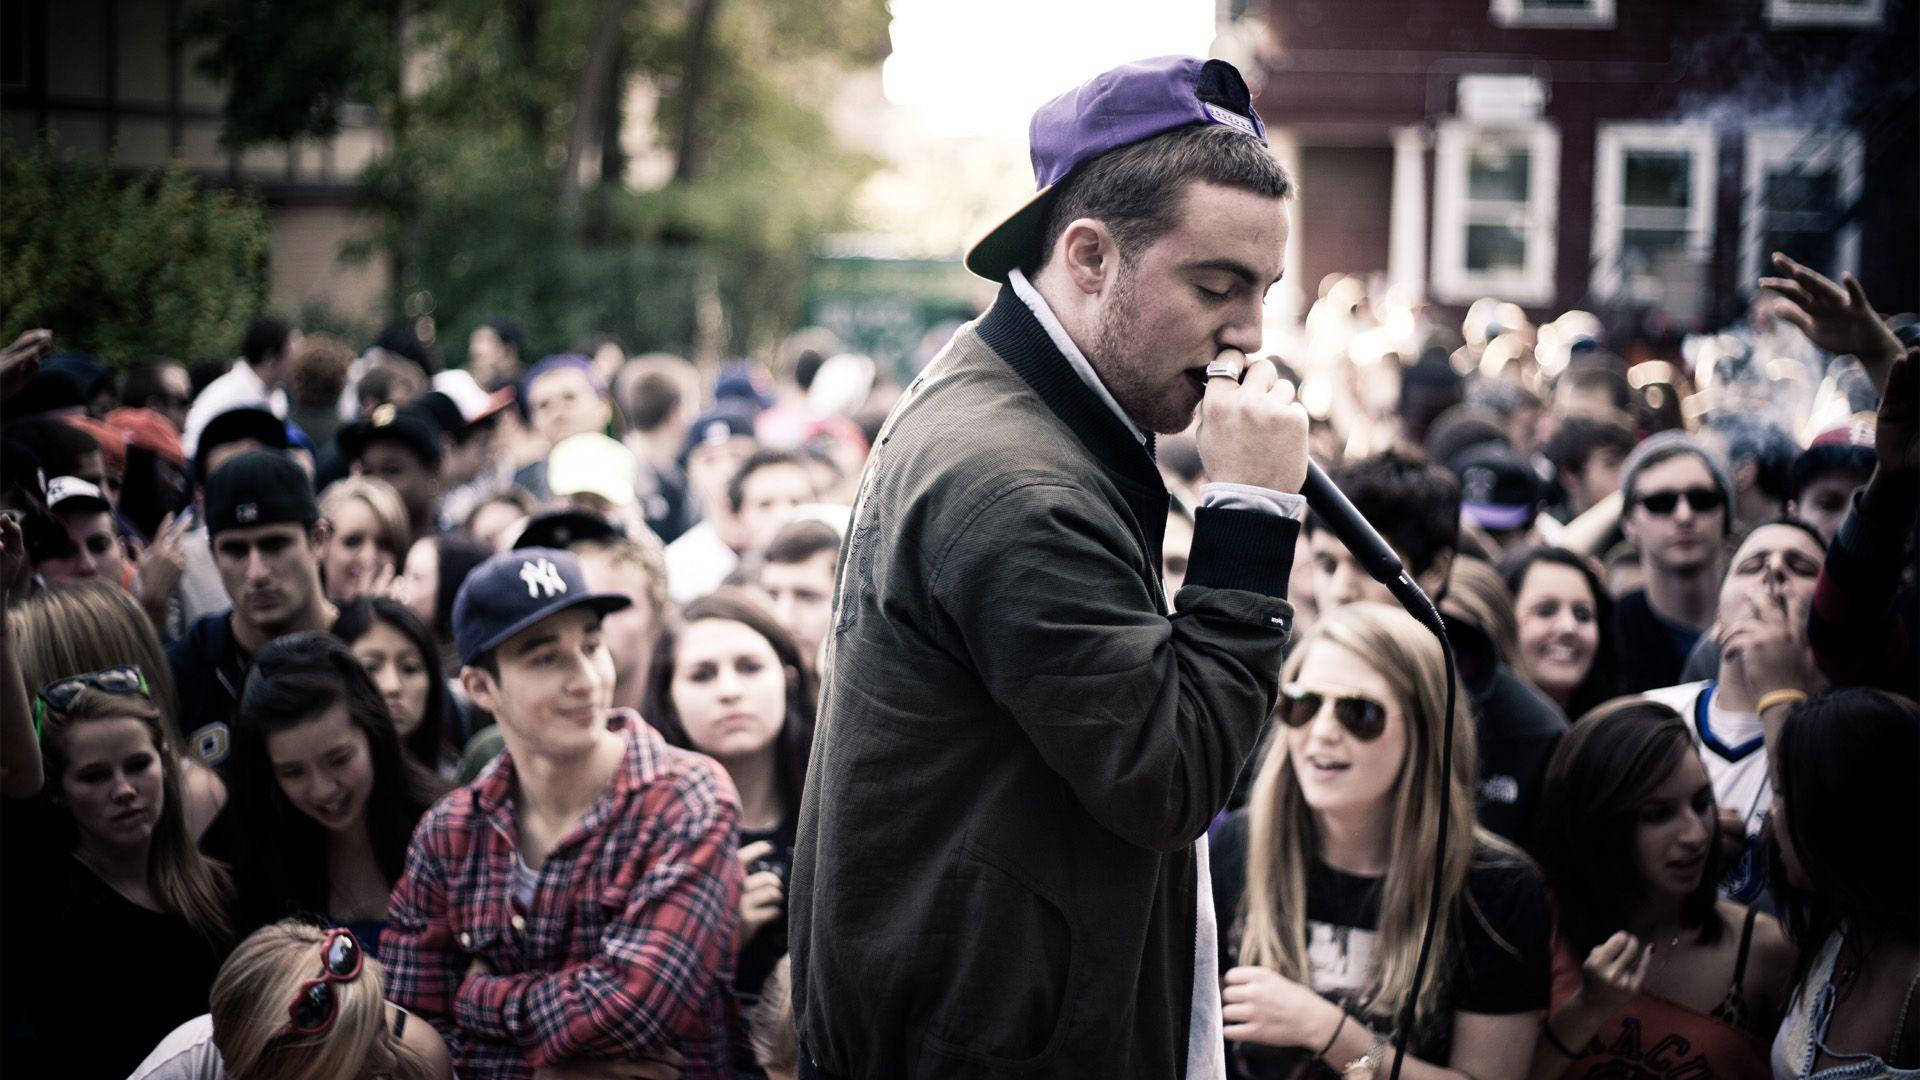 Mac Miller Performing Outdoors With Crowd Background